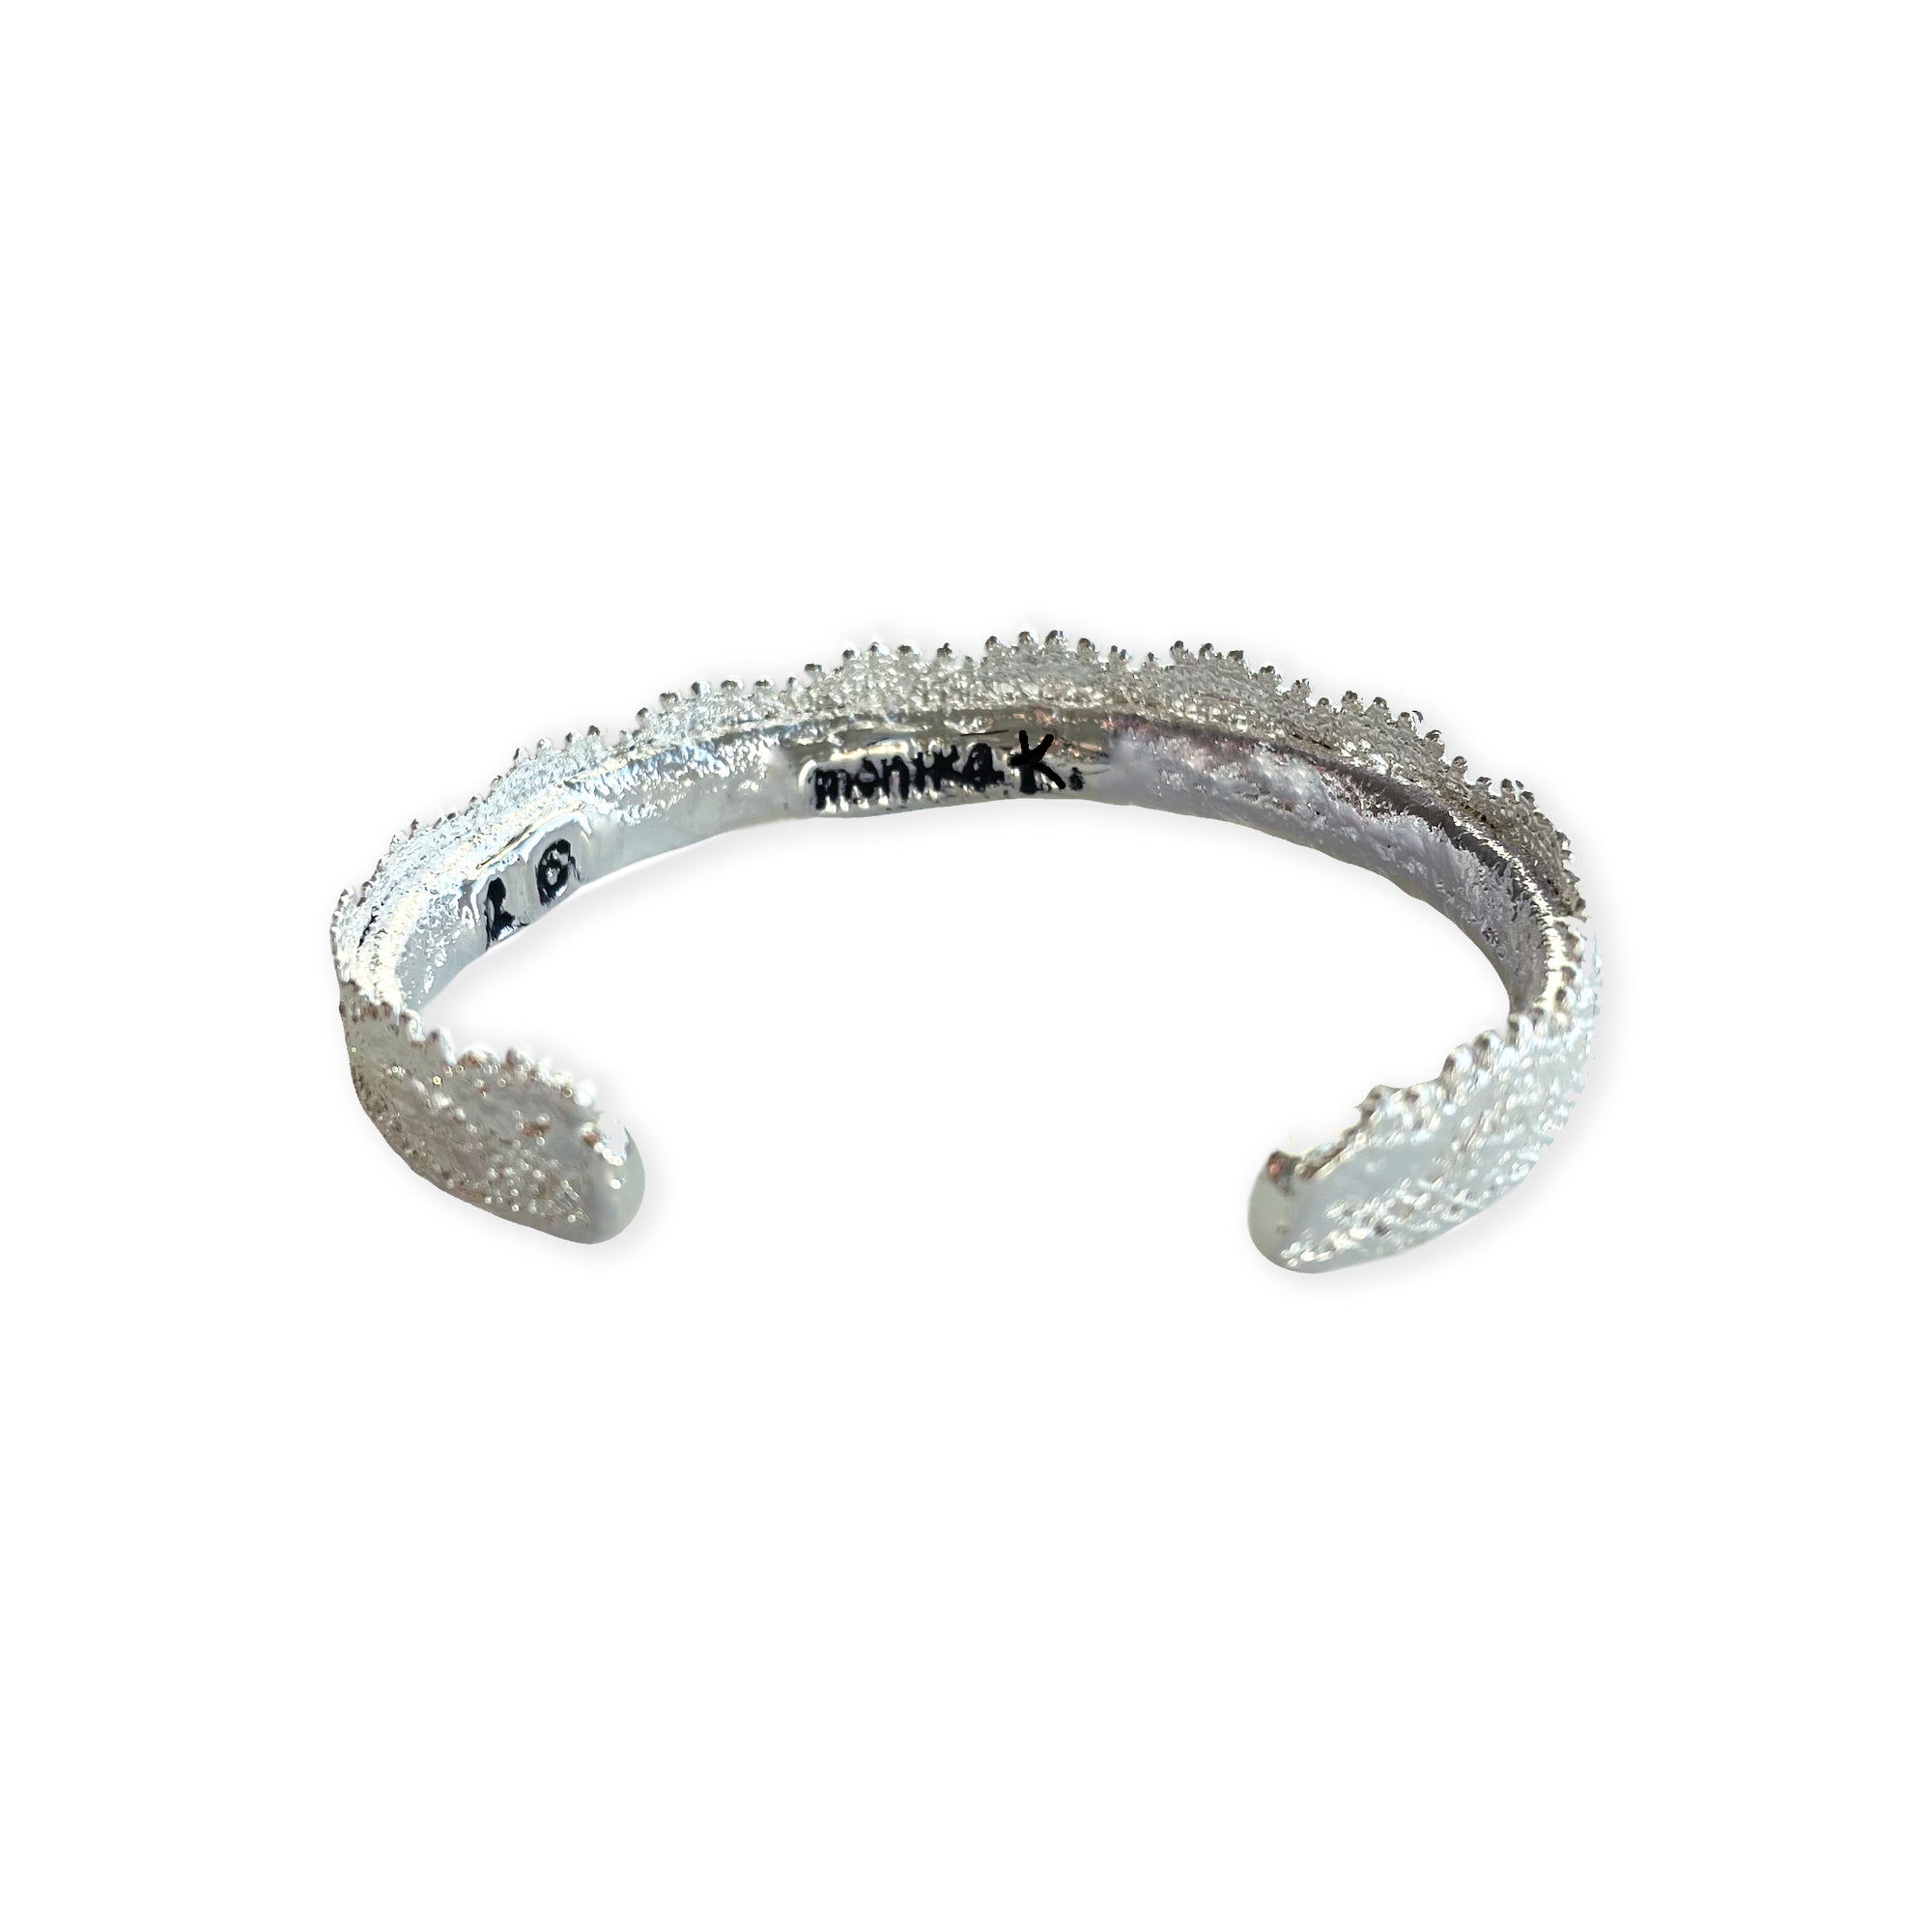 Lace bangle bracelet in sterling silver. Signed and numbered in the back.